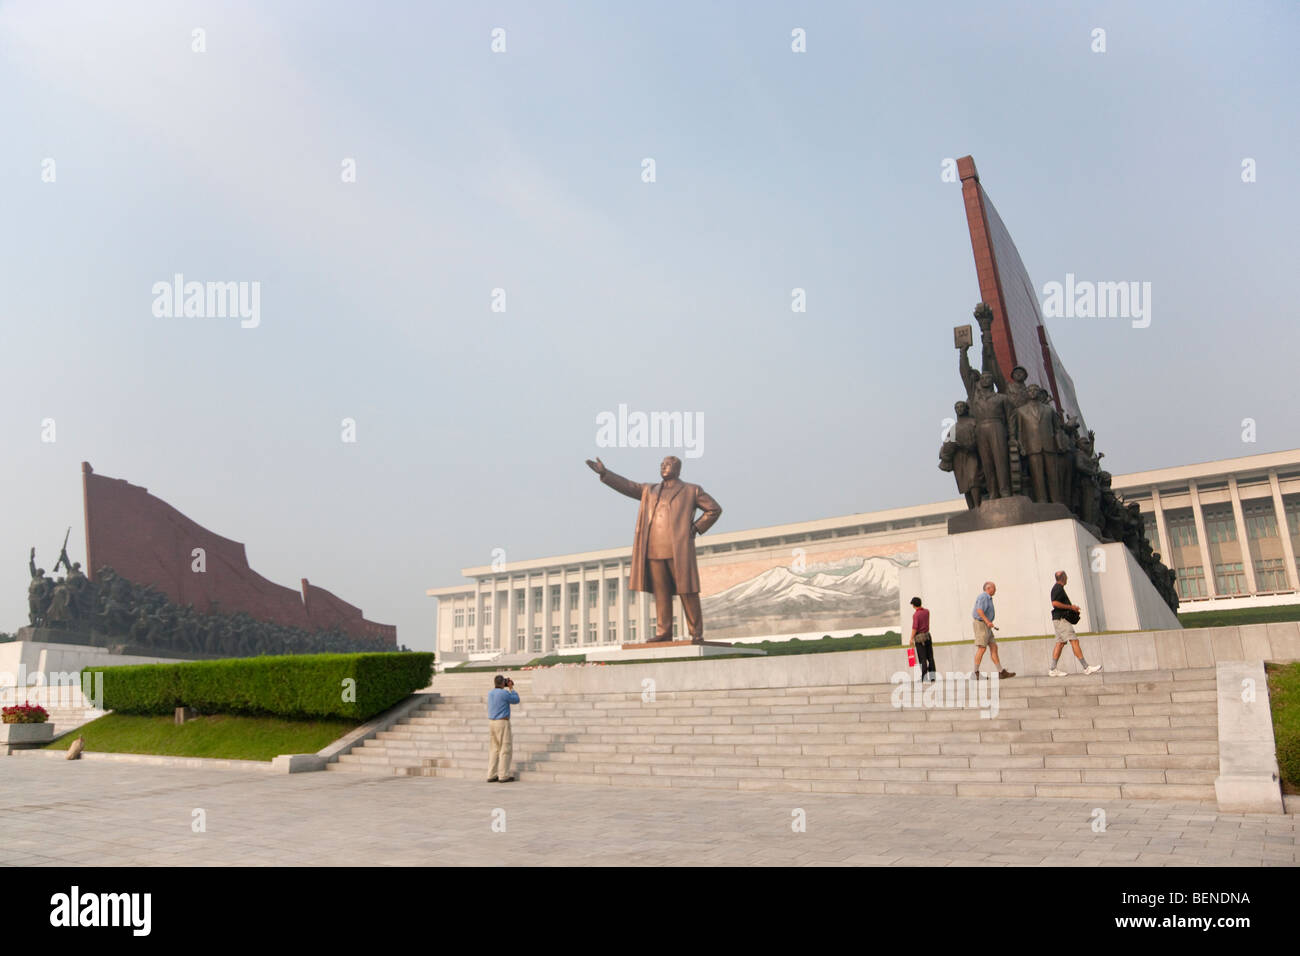 Mansudae Grand Monument, statue of former President Kim Il-Sung, Mansudae Assembly Hall on Mansu Hill, Pyongyang, North Korea Stock Photo